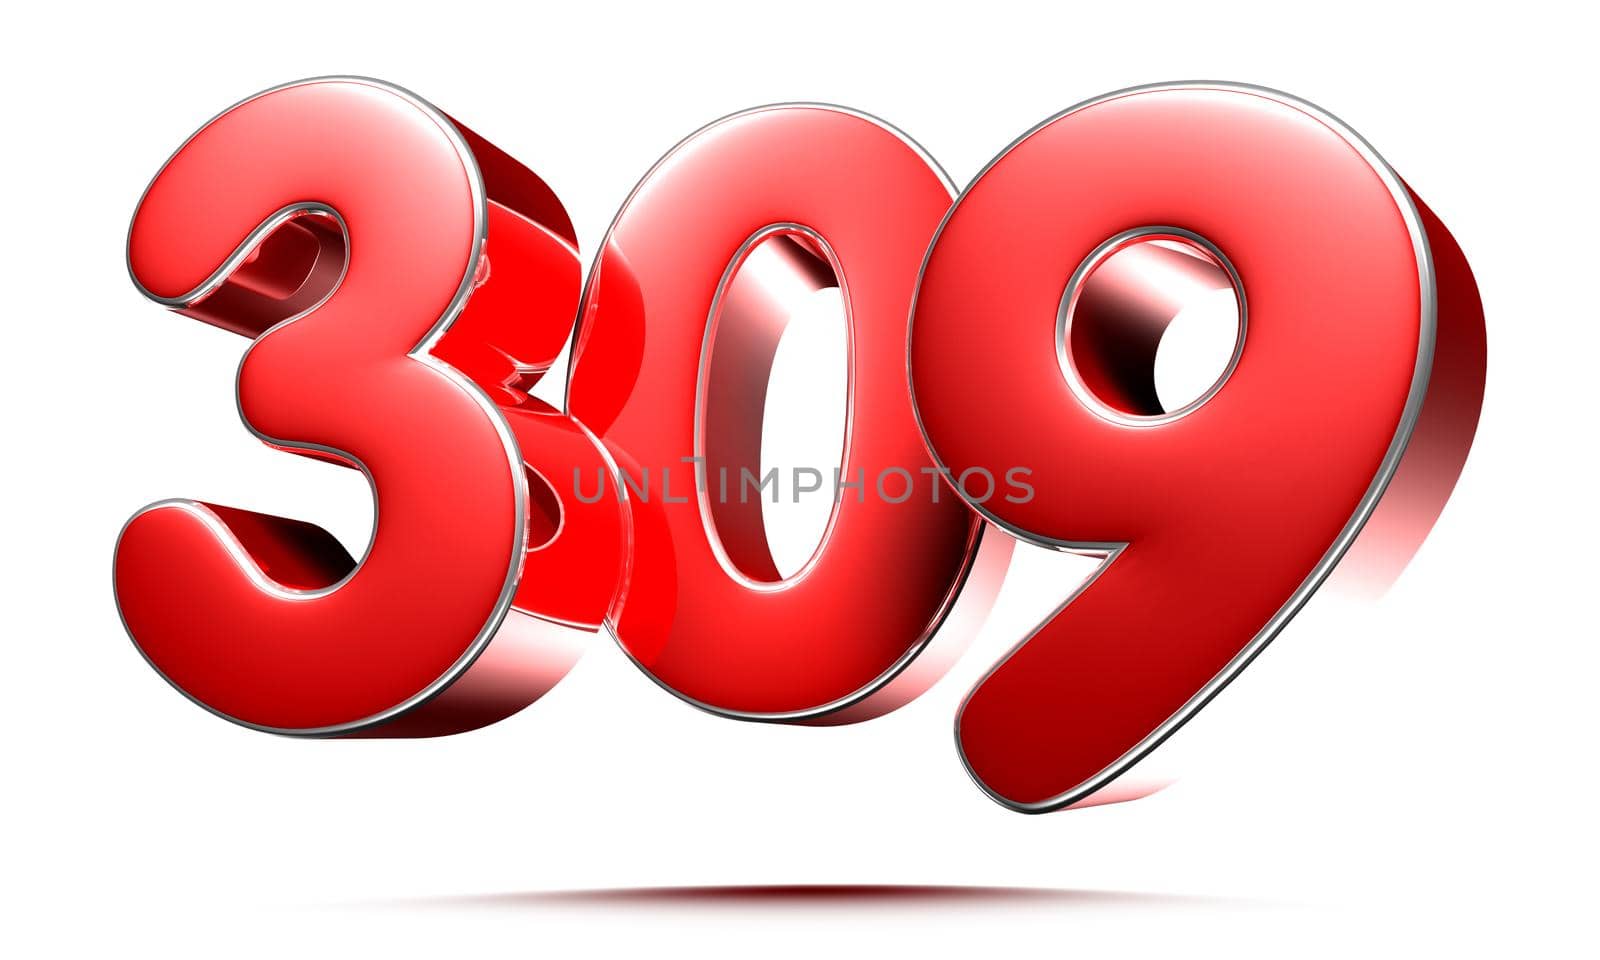 Rounded red numbers 309 on white background 3D illustration with clipping path by thitimontoyai